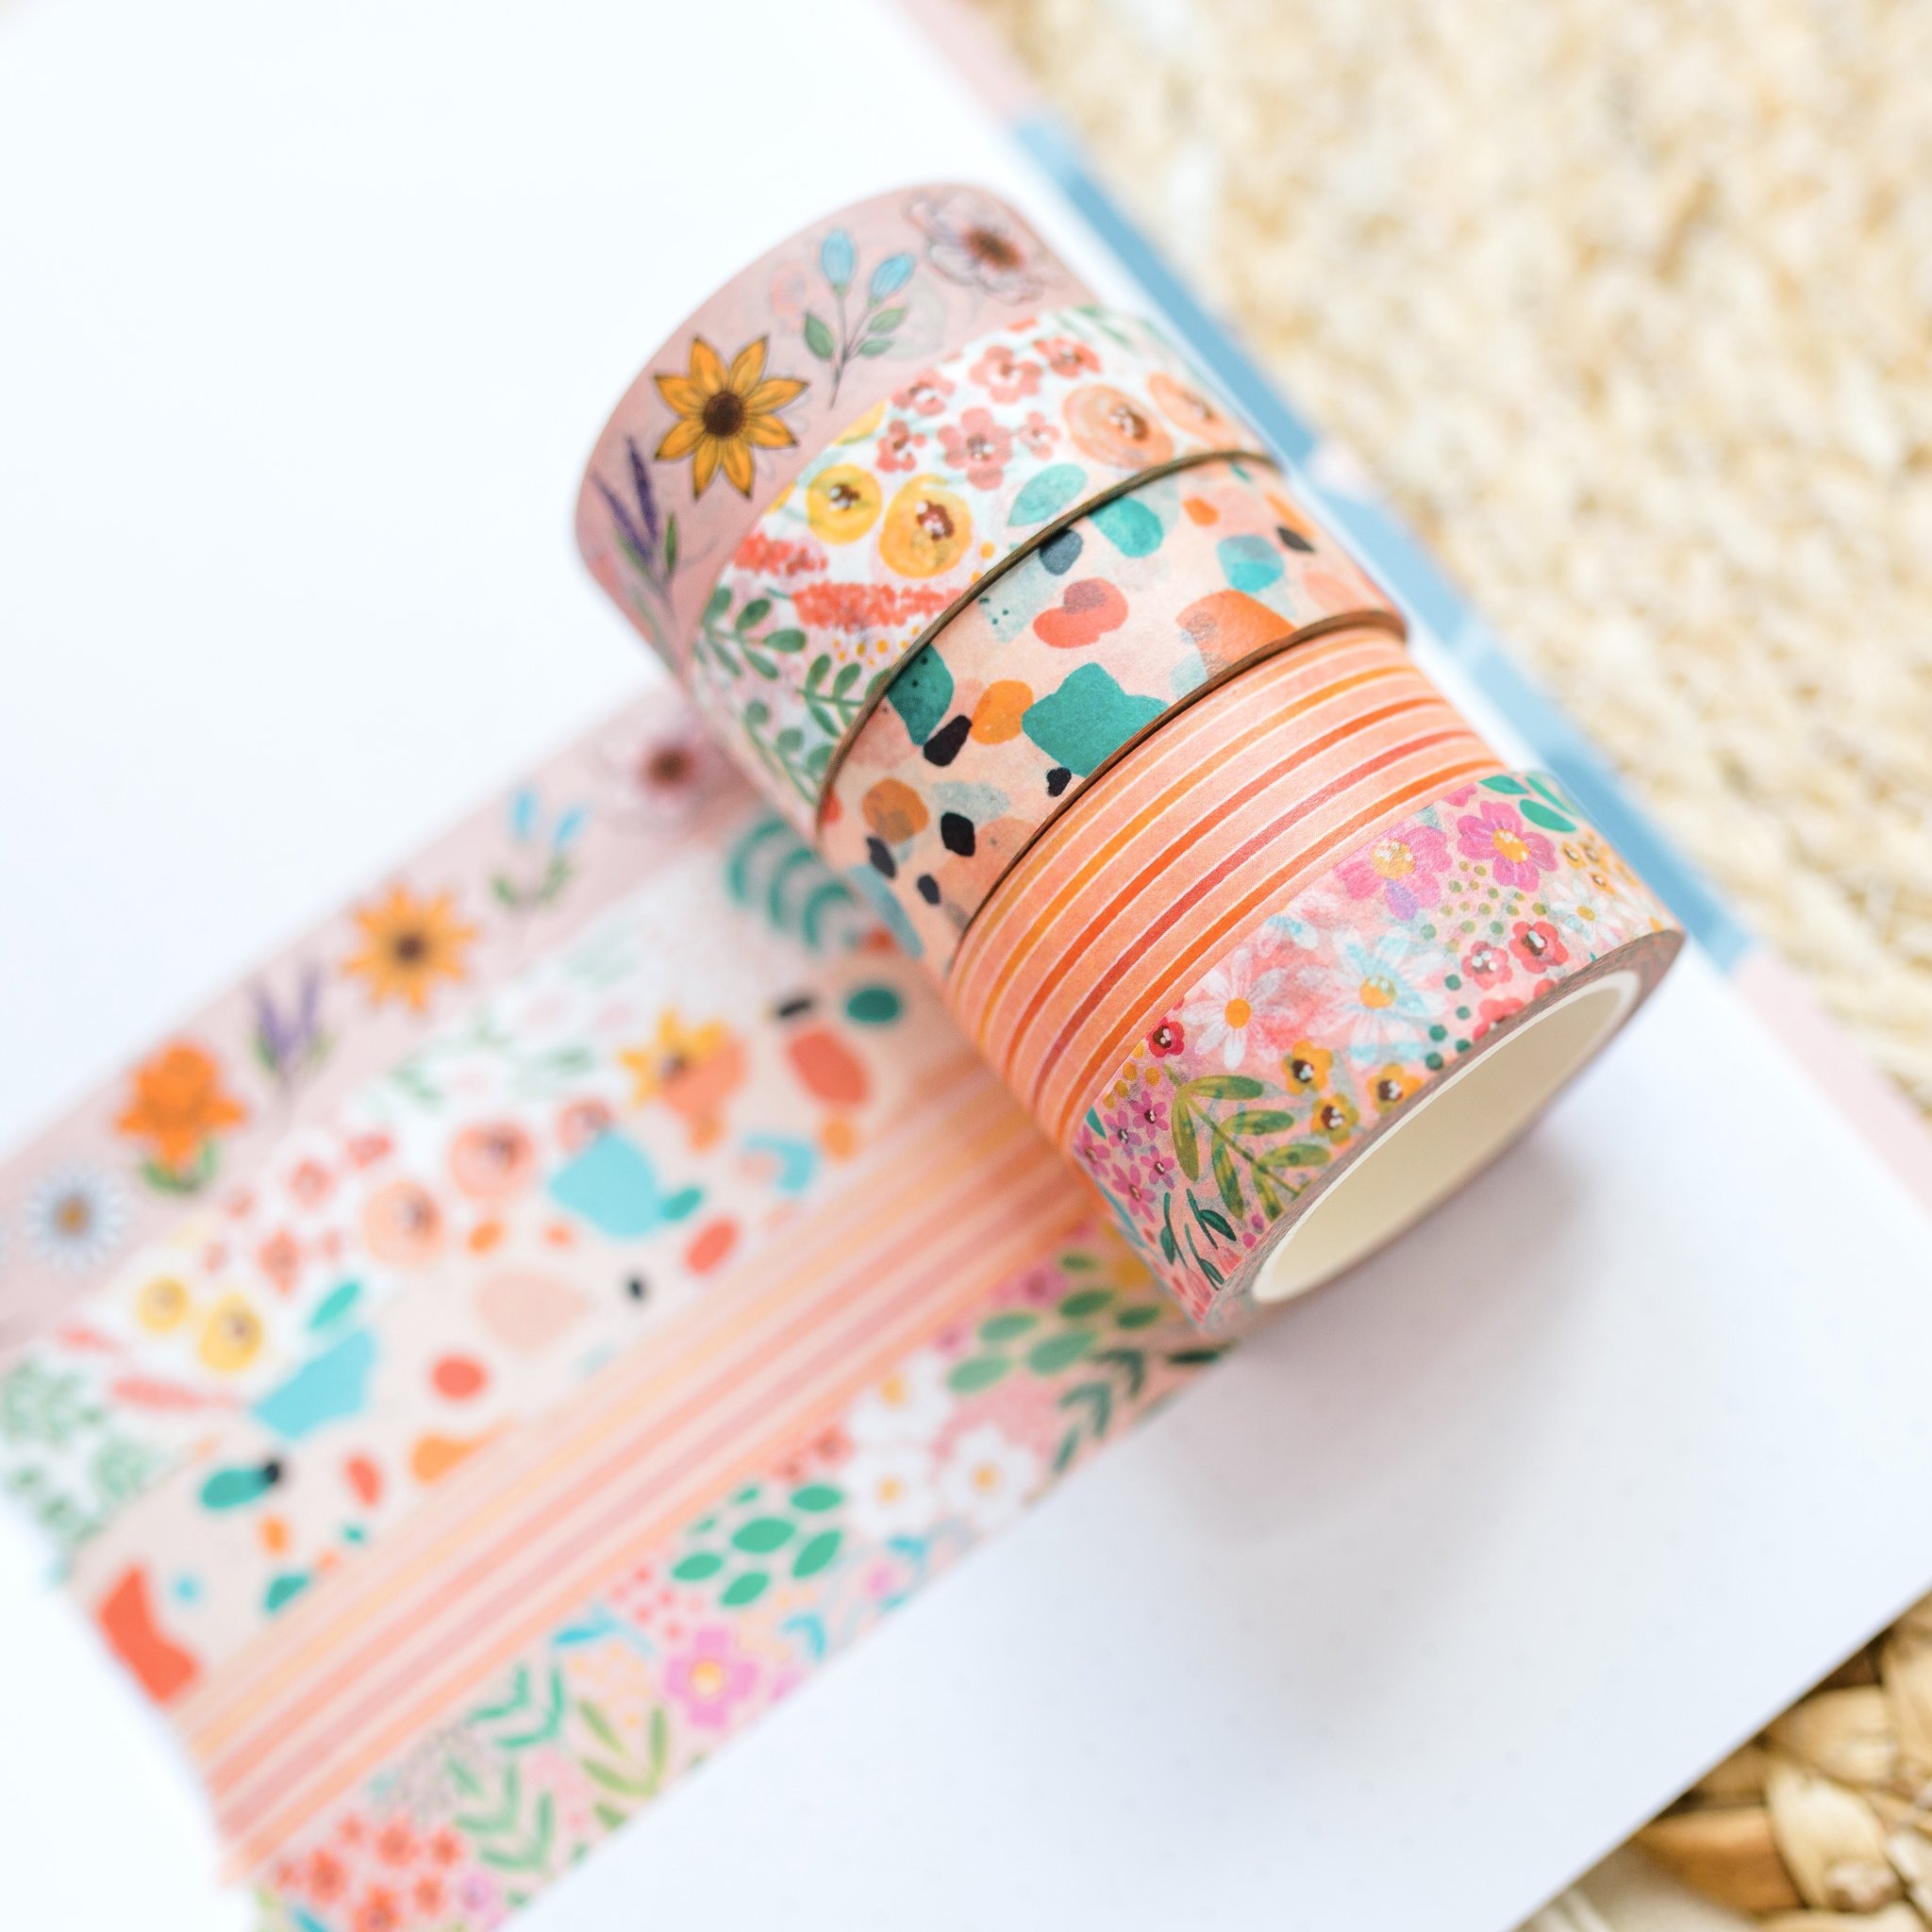 Buy create your own design bulk adhesive washi tape manufacturer Featured Image